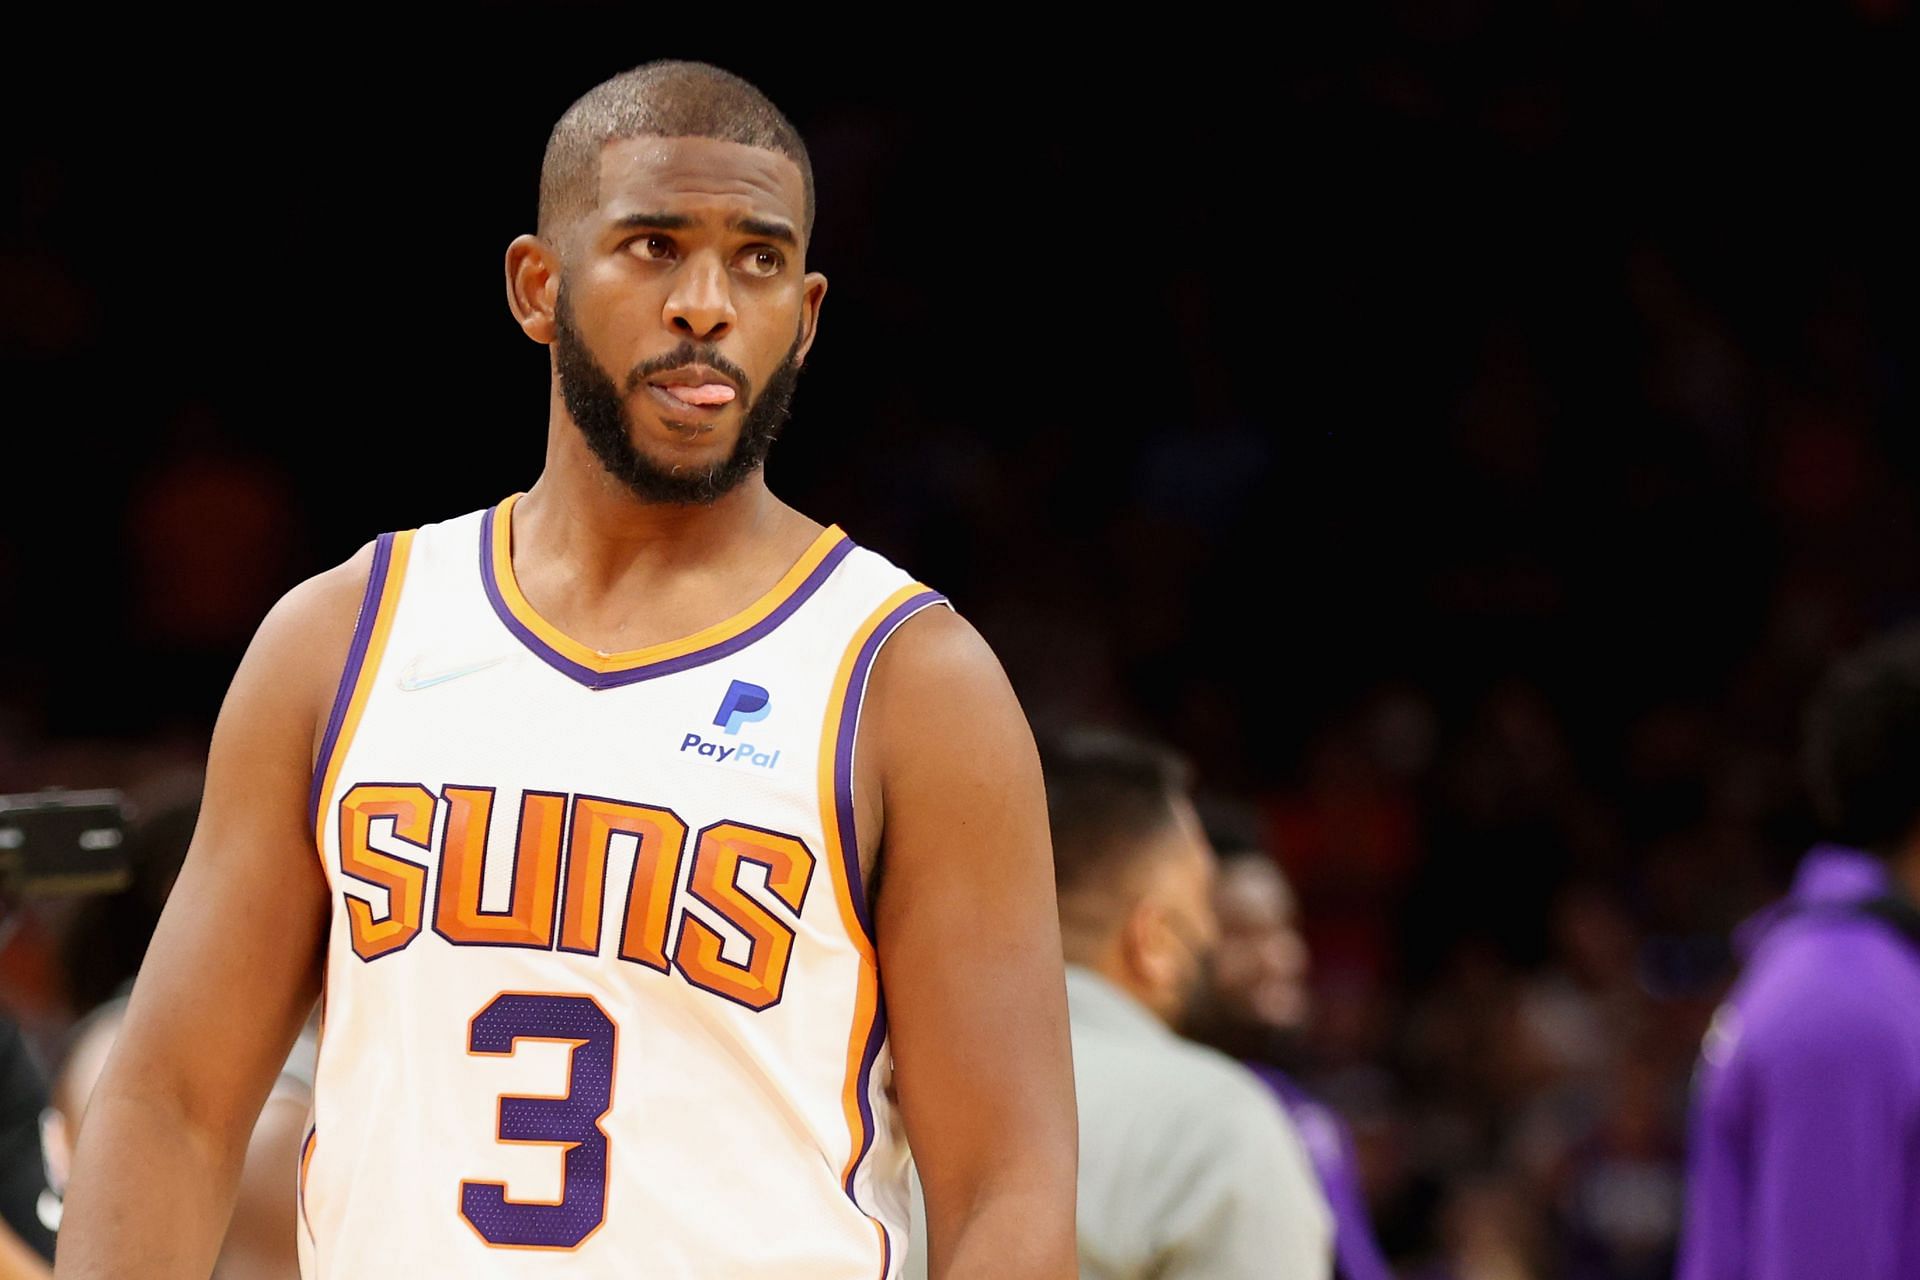 Chris Paul looks on during a Phoenix Suns game.